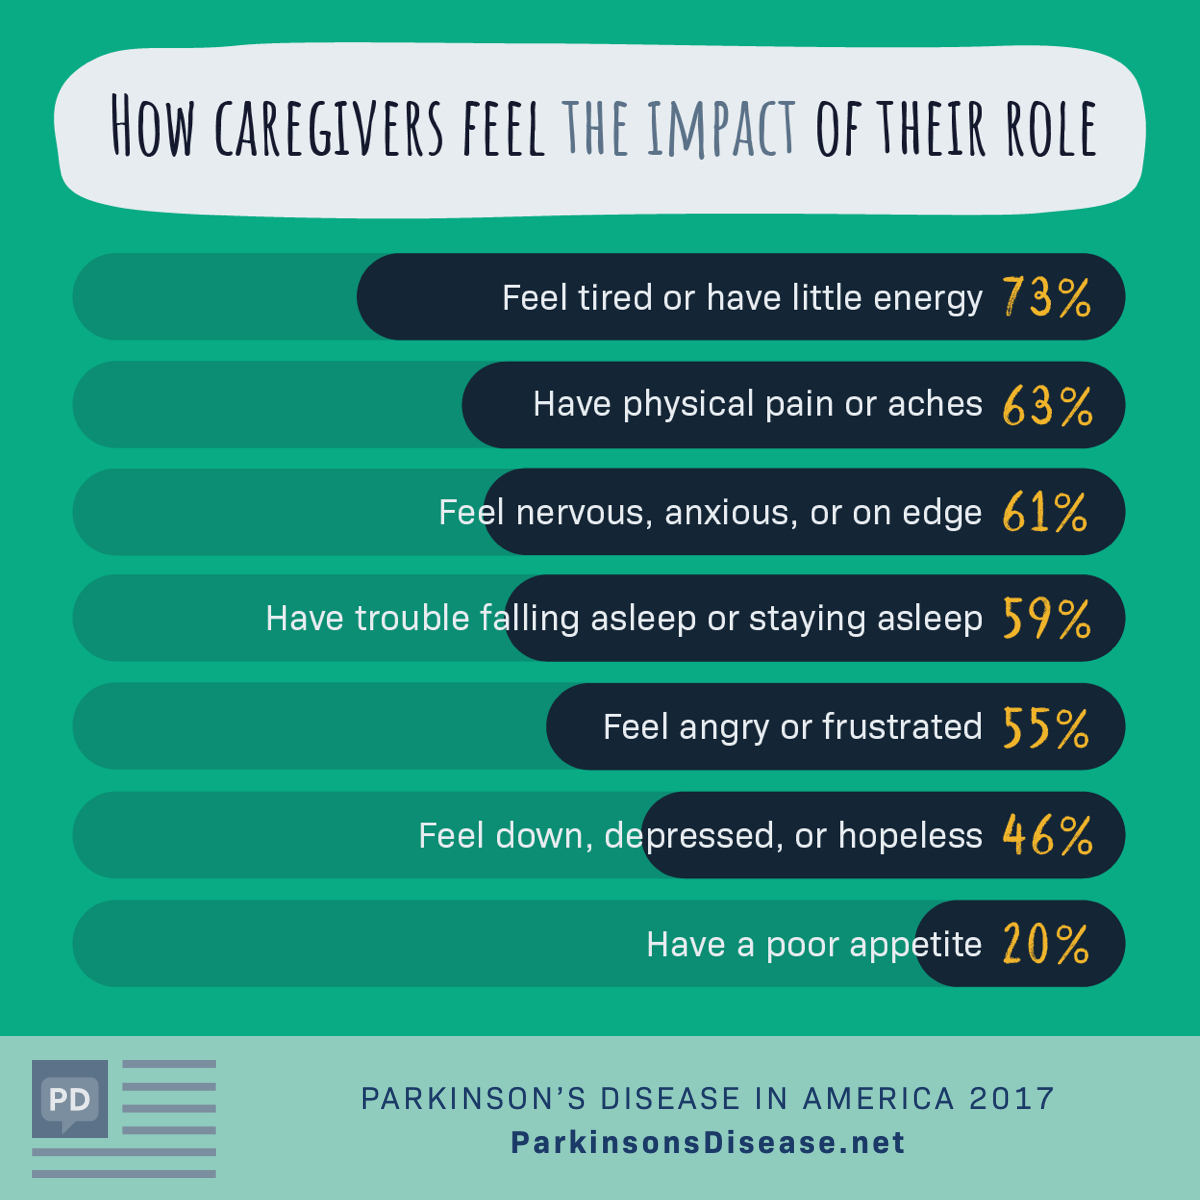 How Caregivers feel the impact of their role